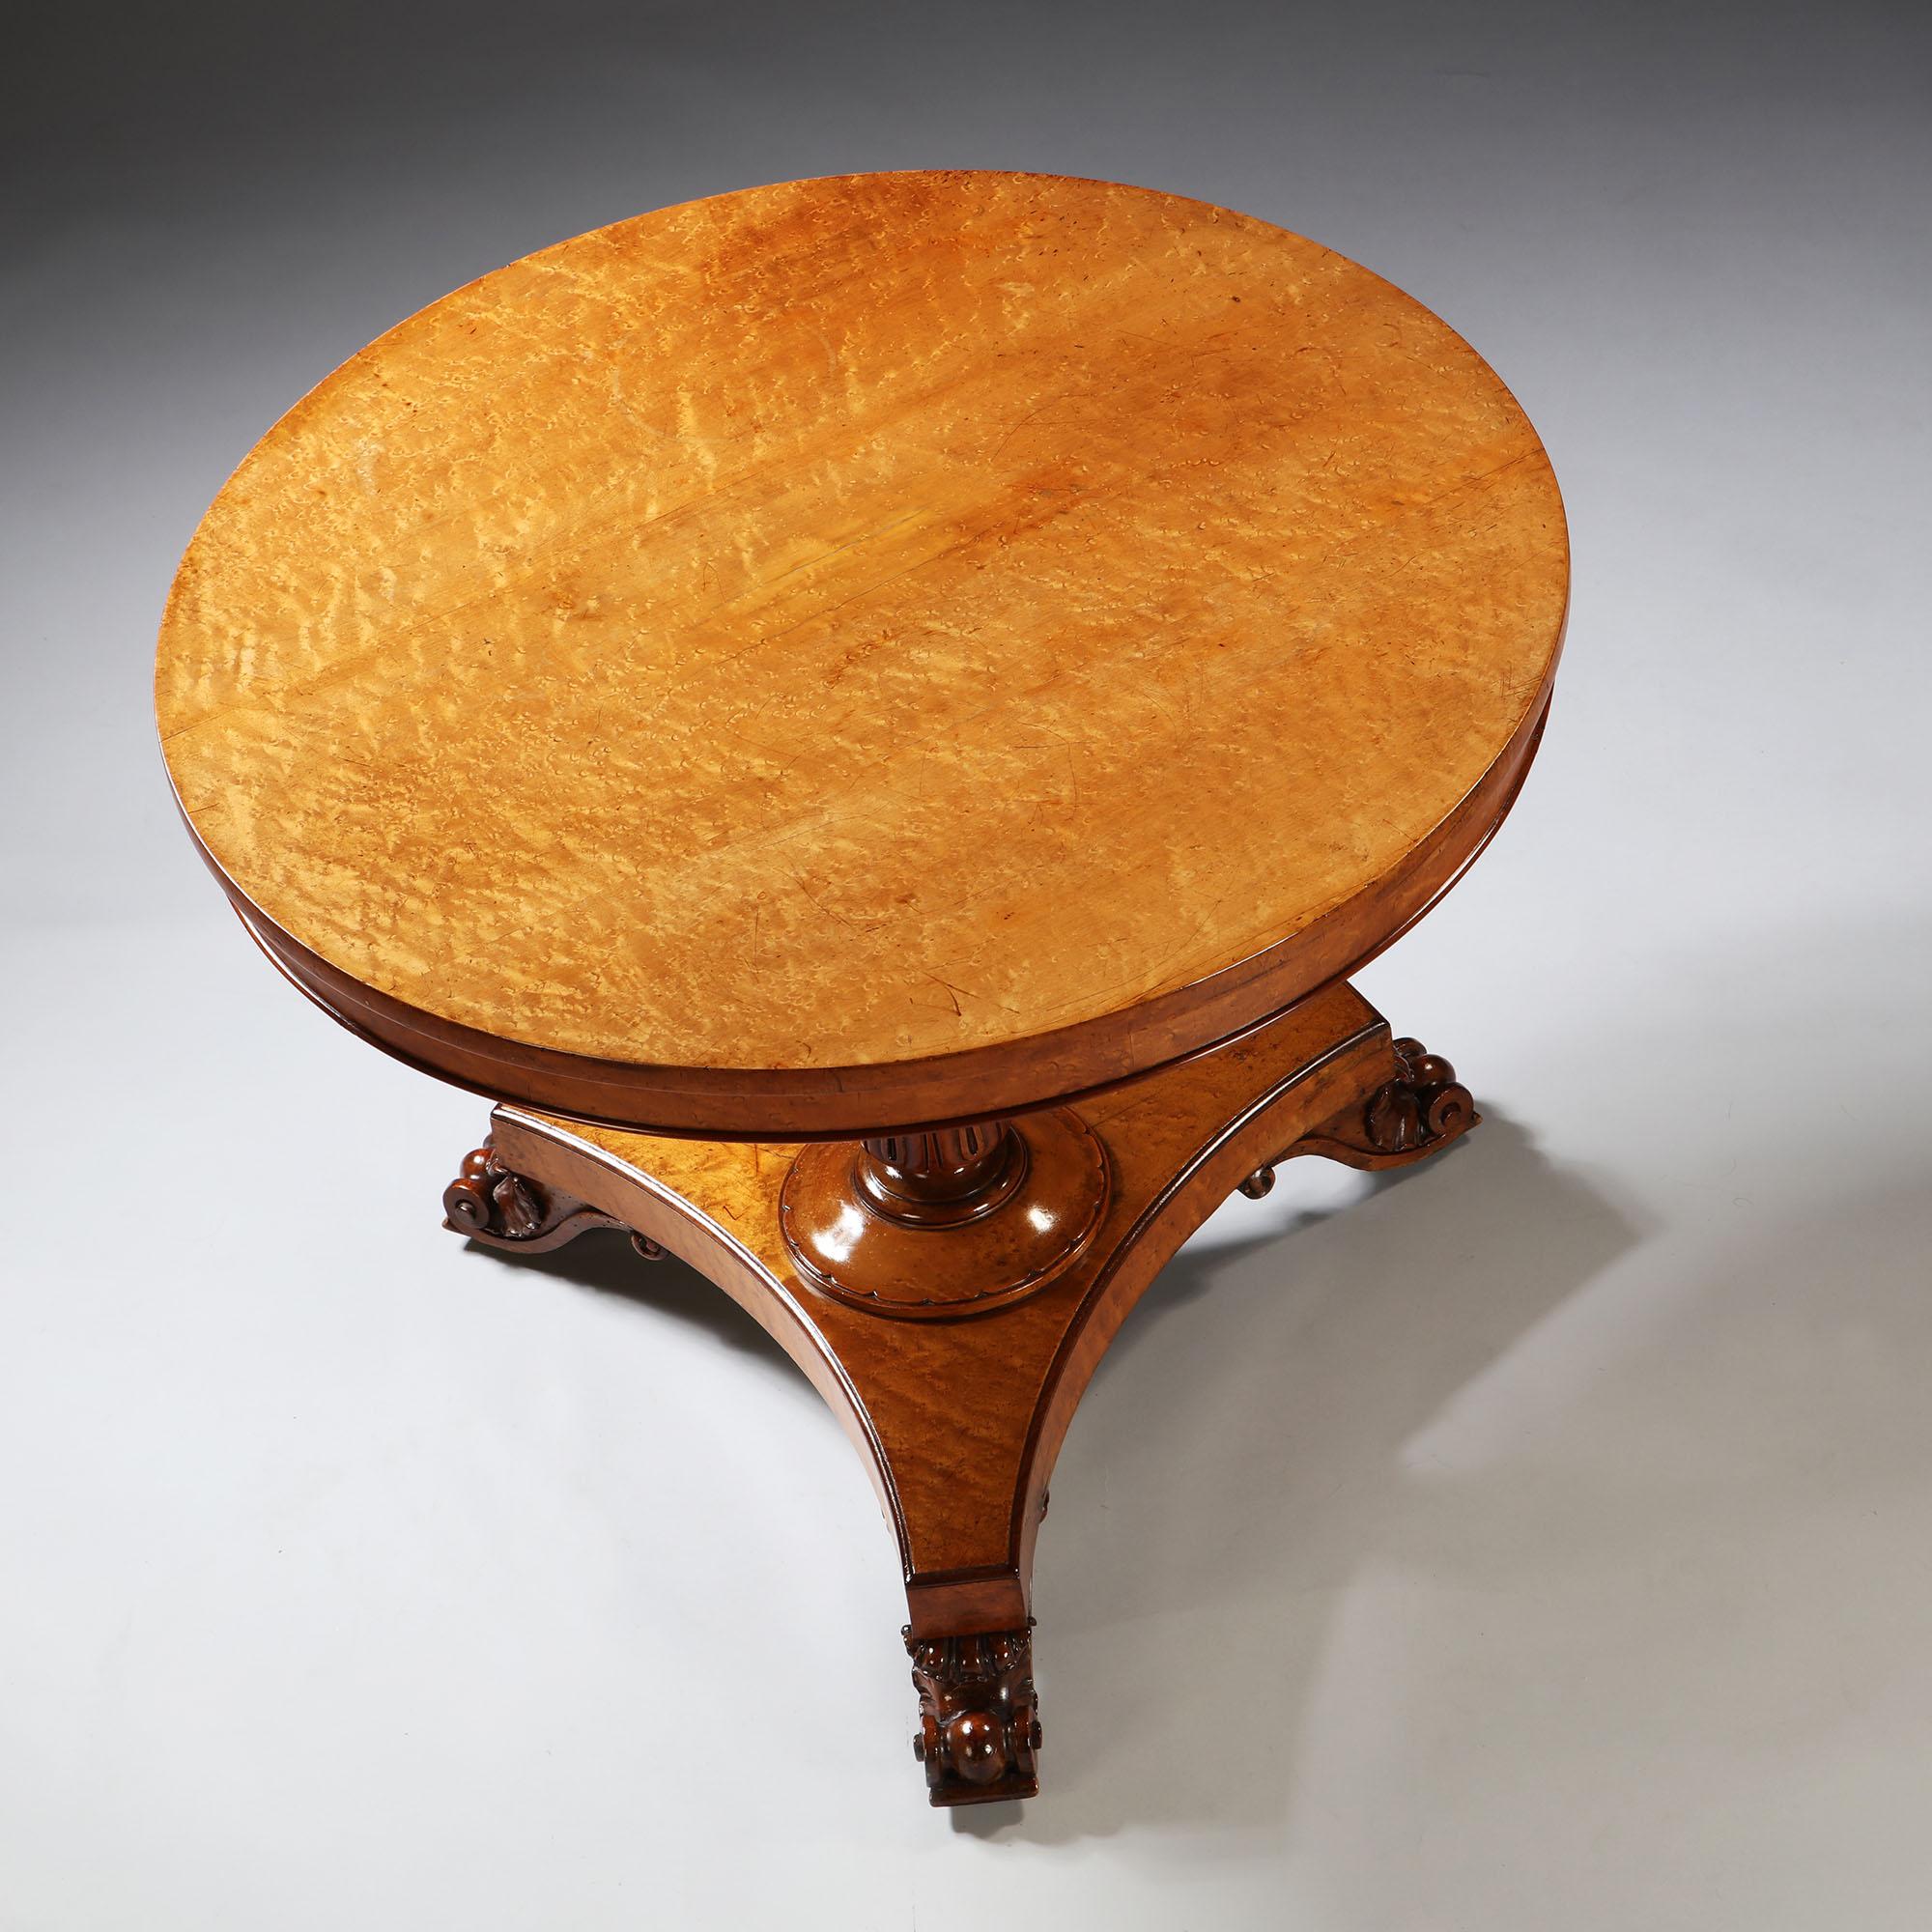 A fine pollard oak circular occasional table by George Morant & Son, with a finely figured top resting on a tripod base with scroll feet and stylized acanthus leaves to the upright.

Stamped to the underside: G I MORANT, 91 NEW BOND ST


The